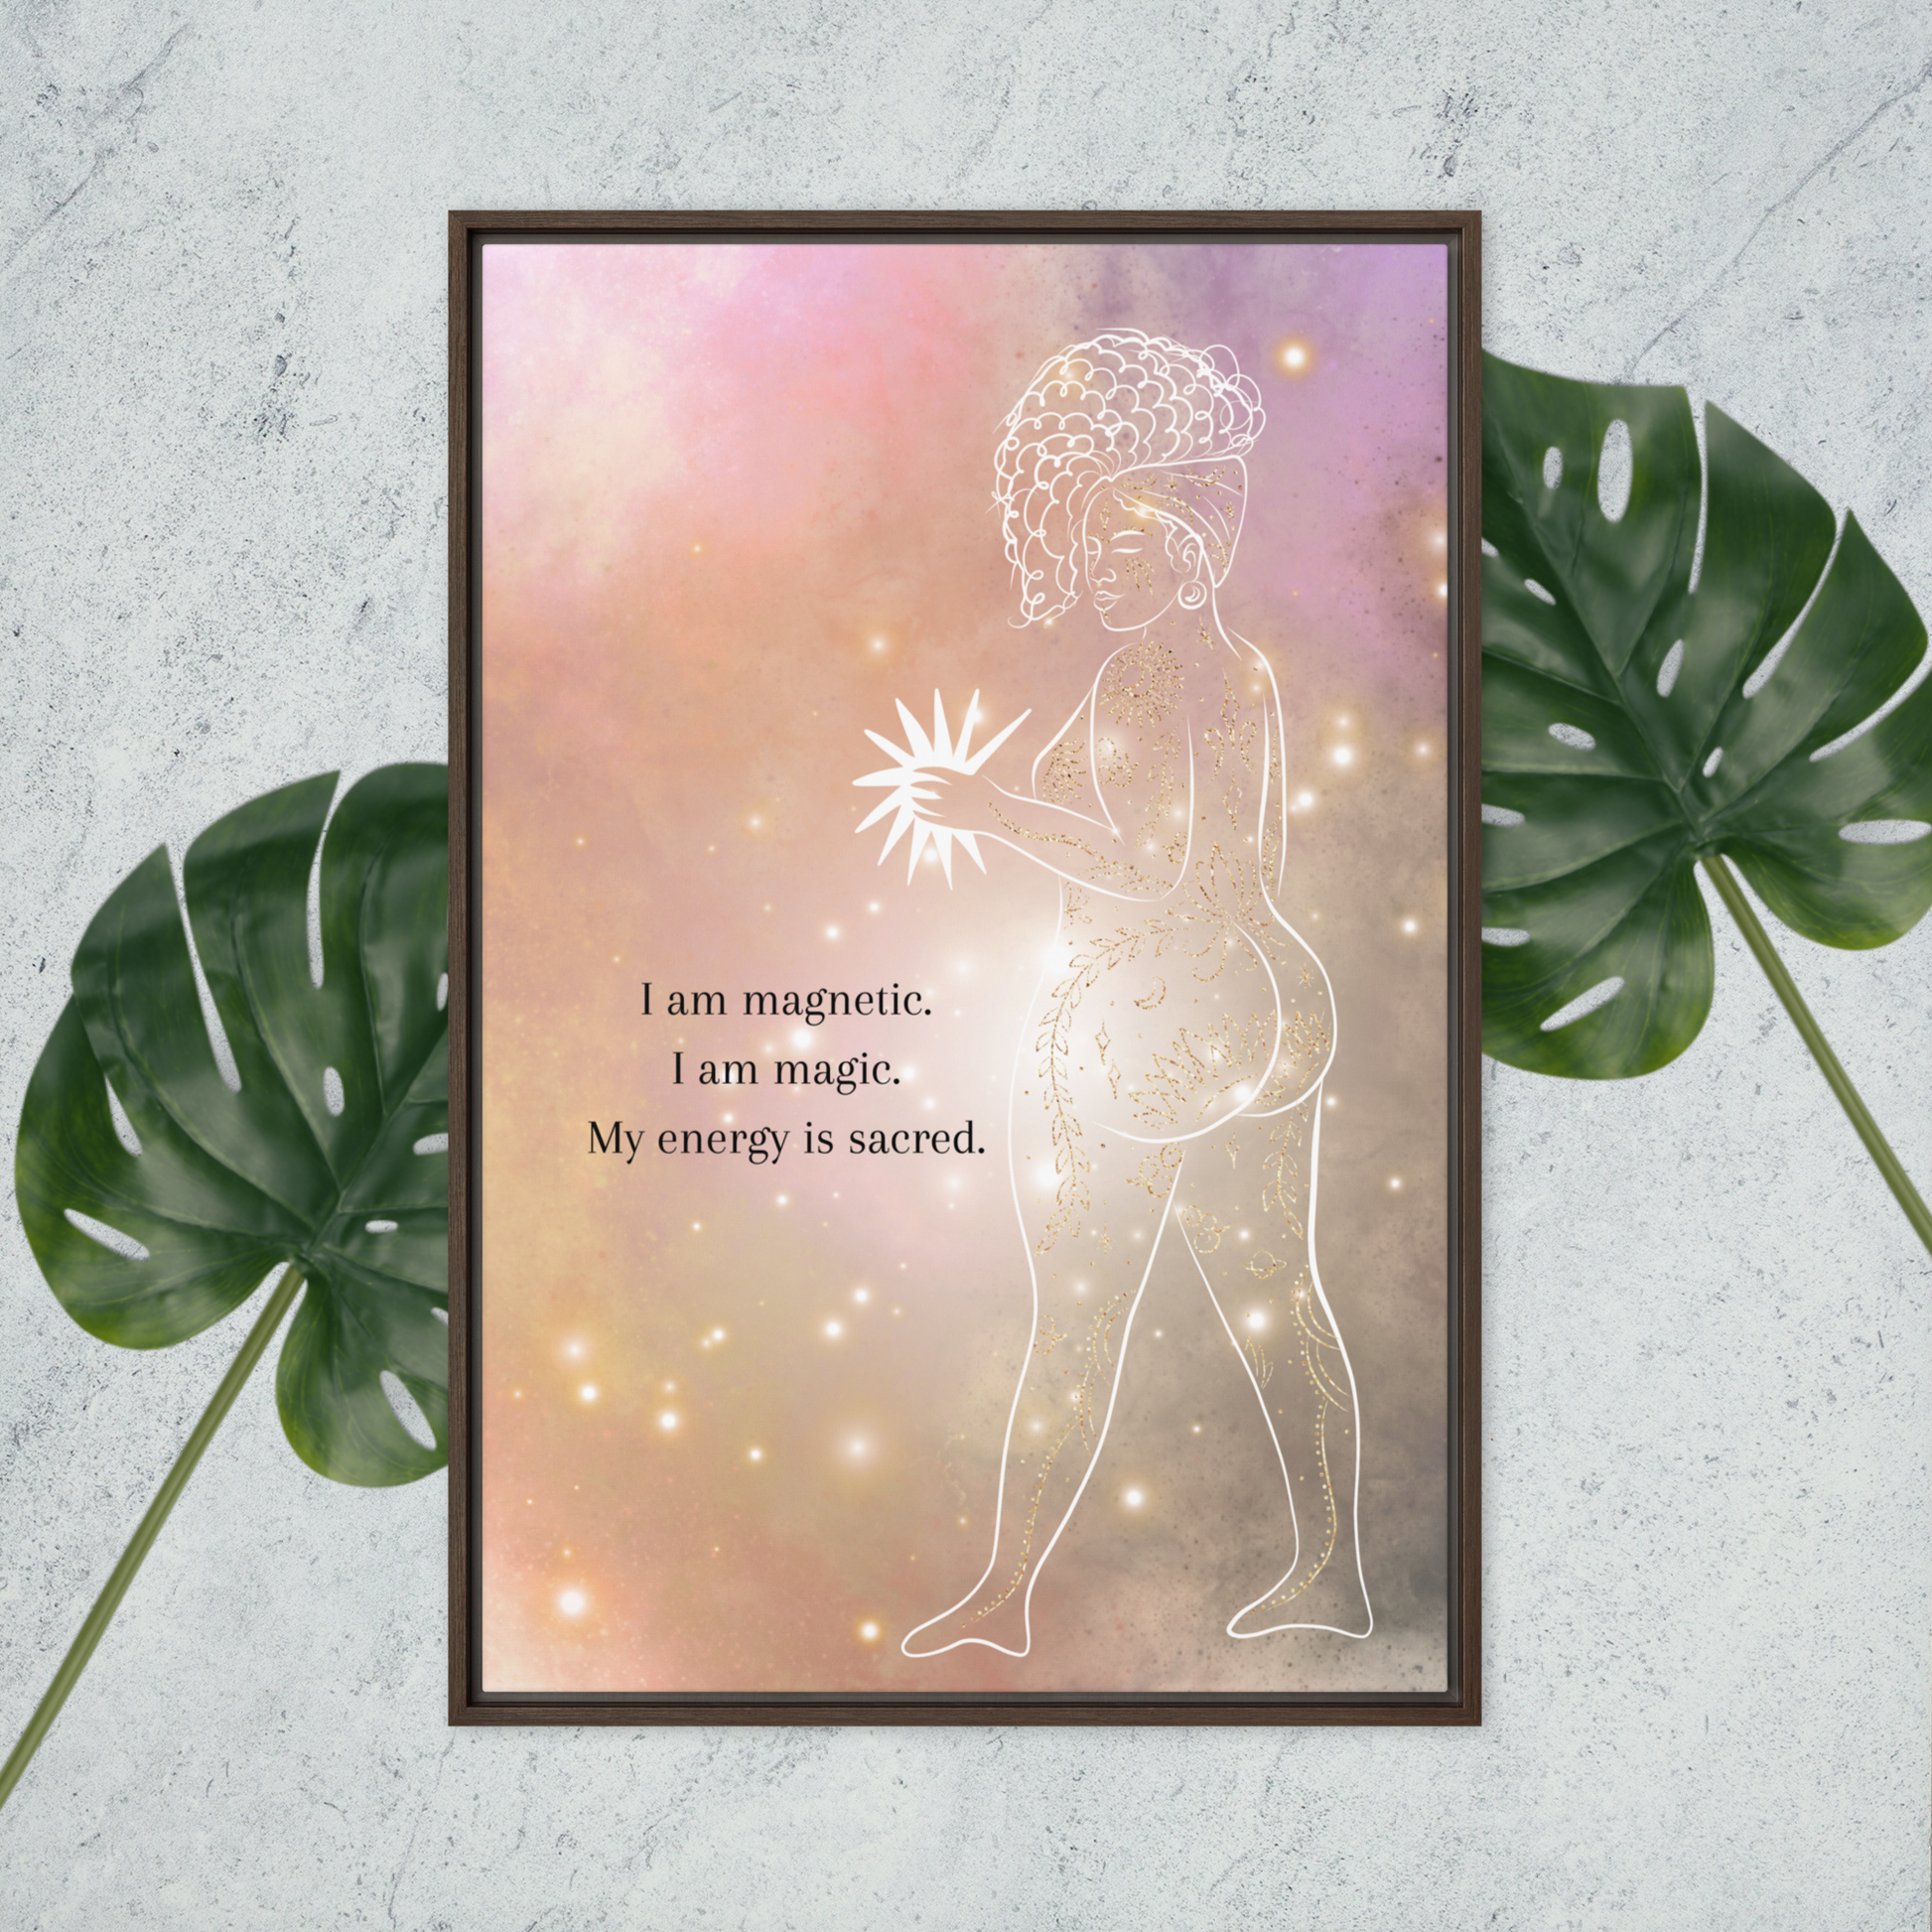 Add a touch of spirituality to your space with the Sacred Prayer Spiritual Decor poster featuring a woman holding a star. Perfect for creating a positive environment in your home or office.